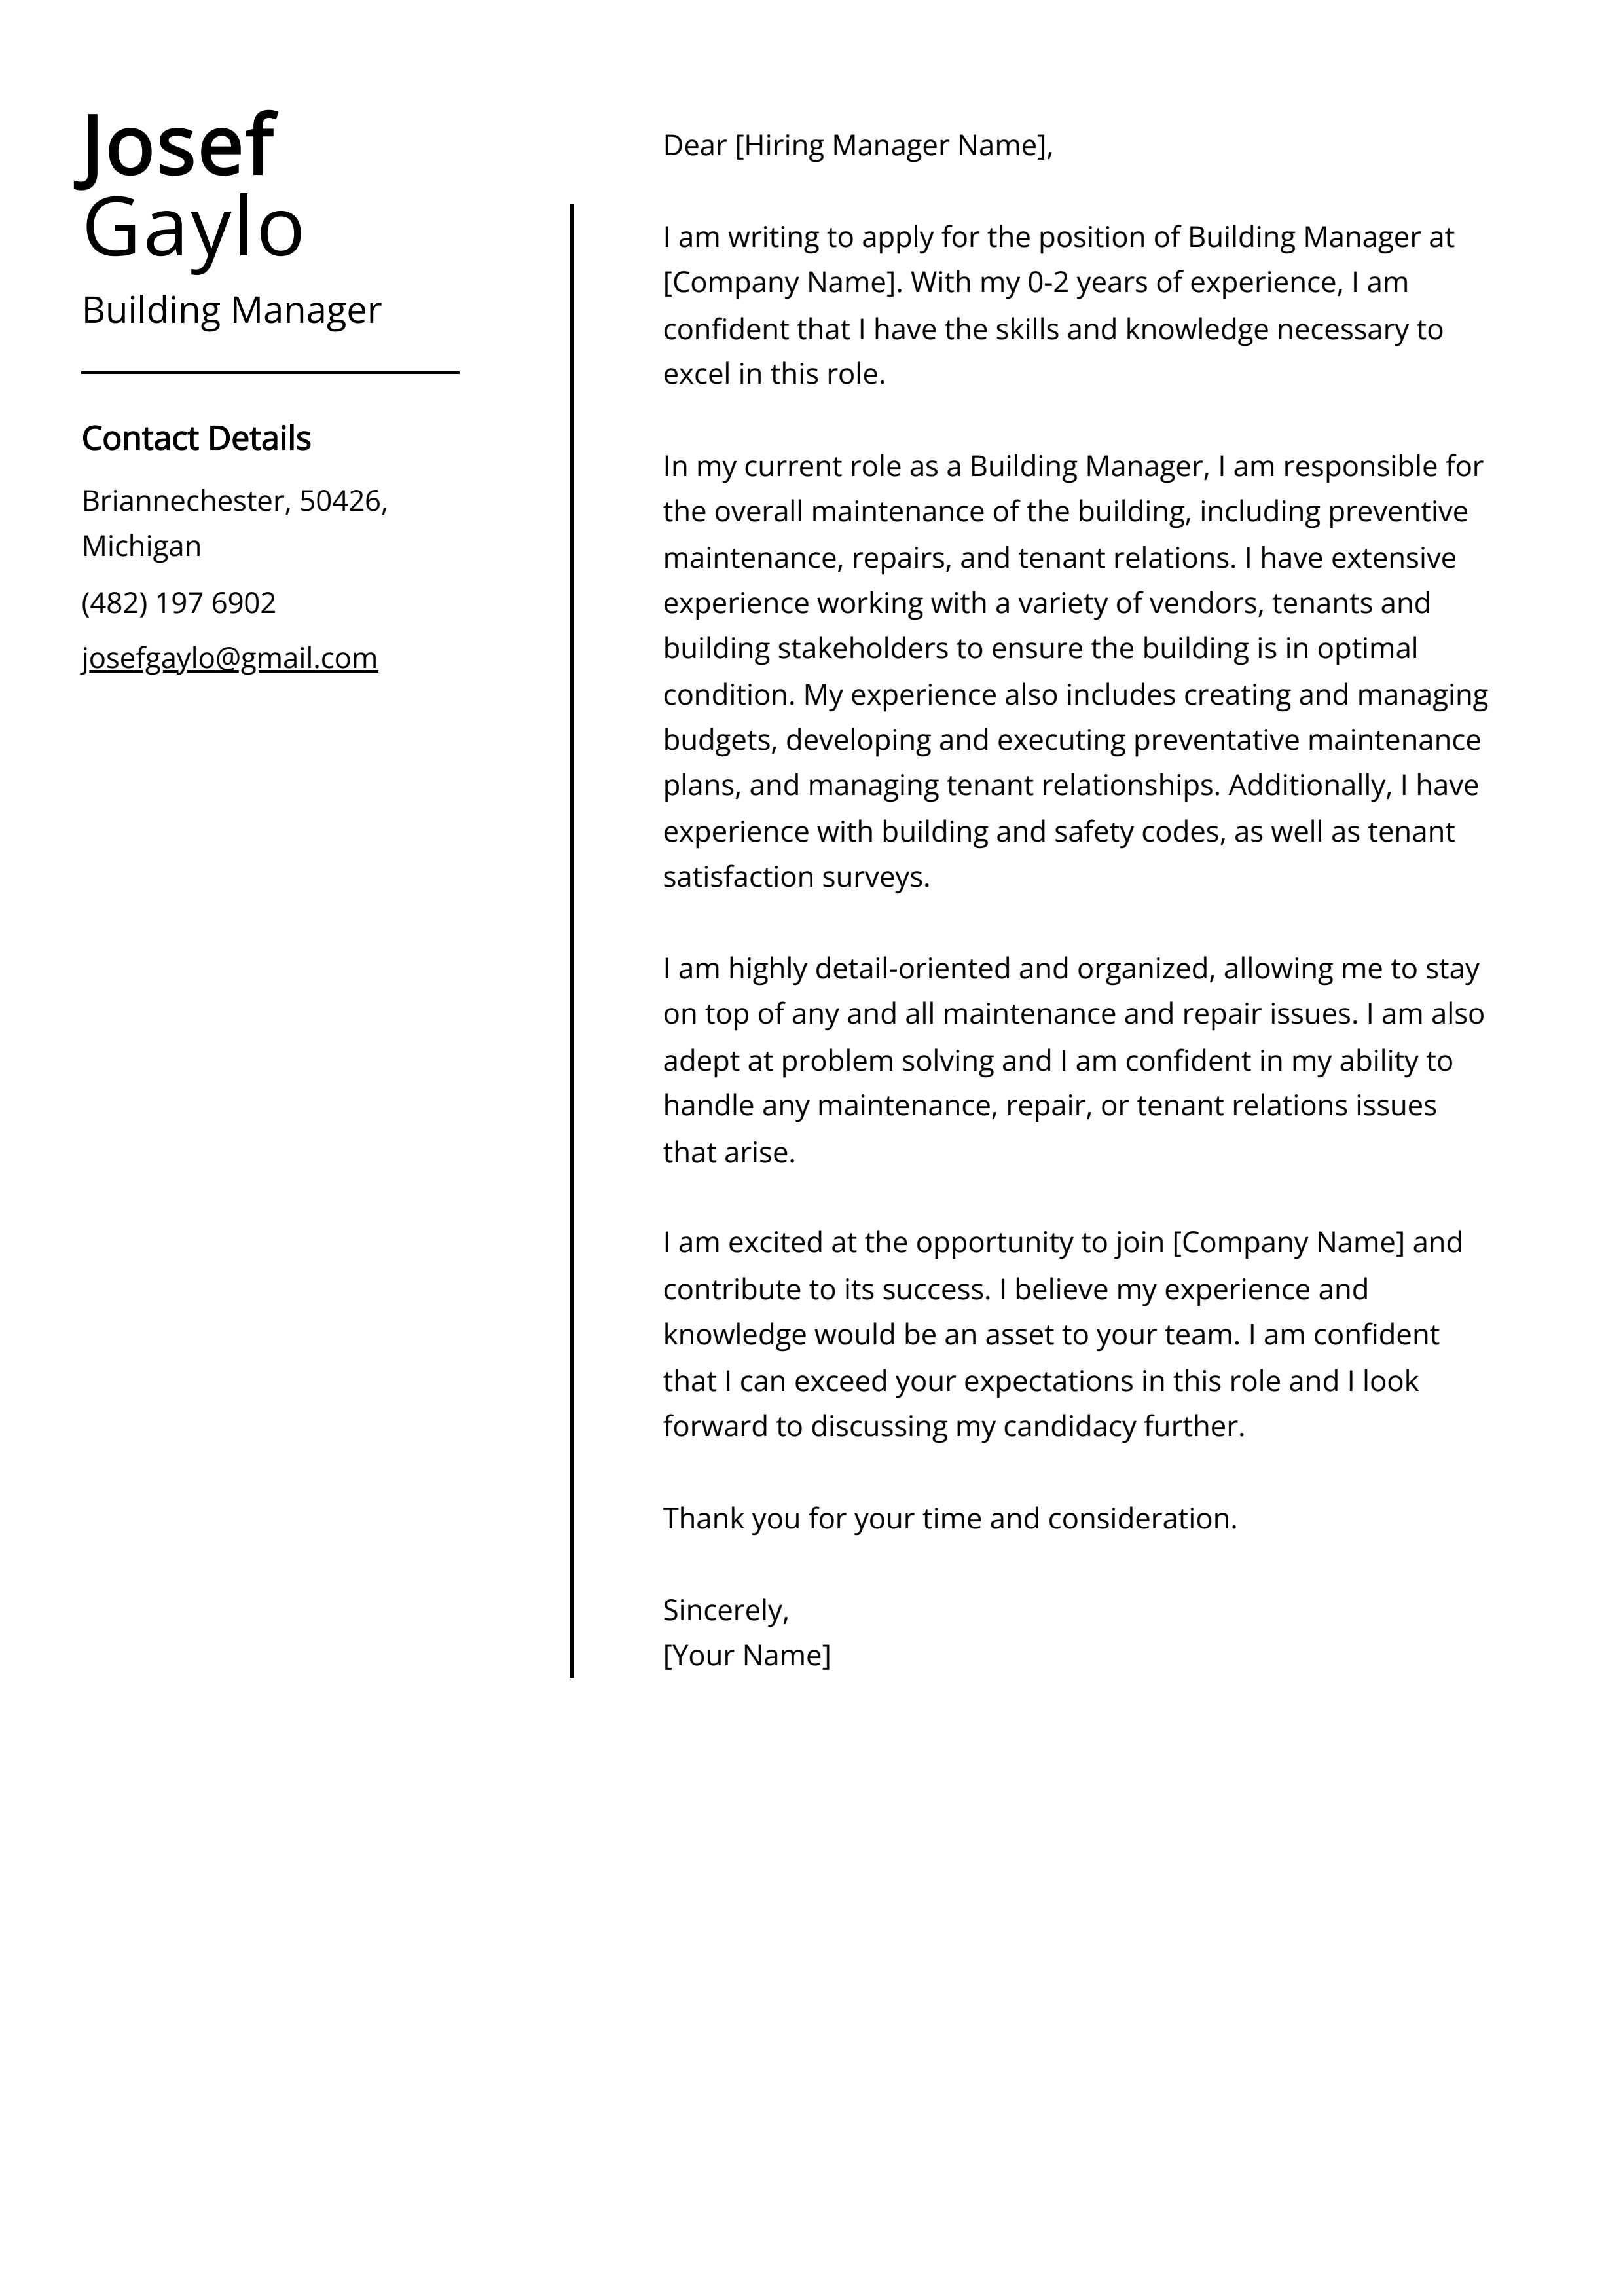 Building Manager Cover Letter Example